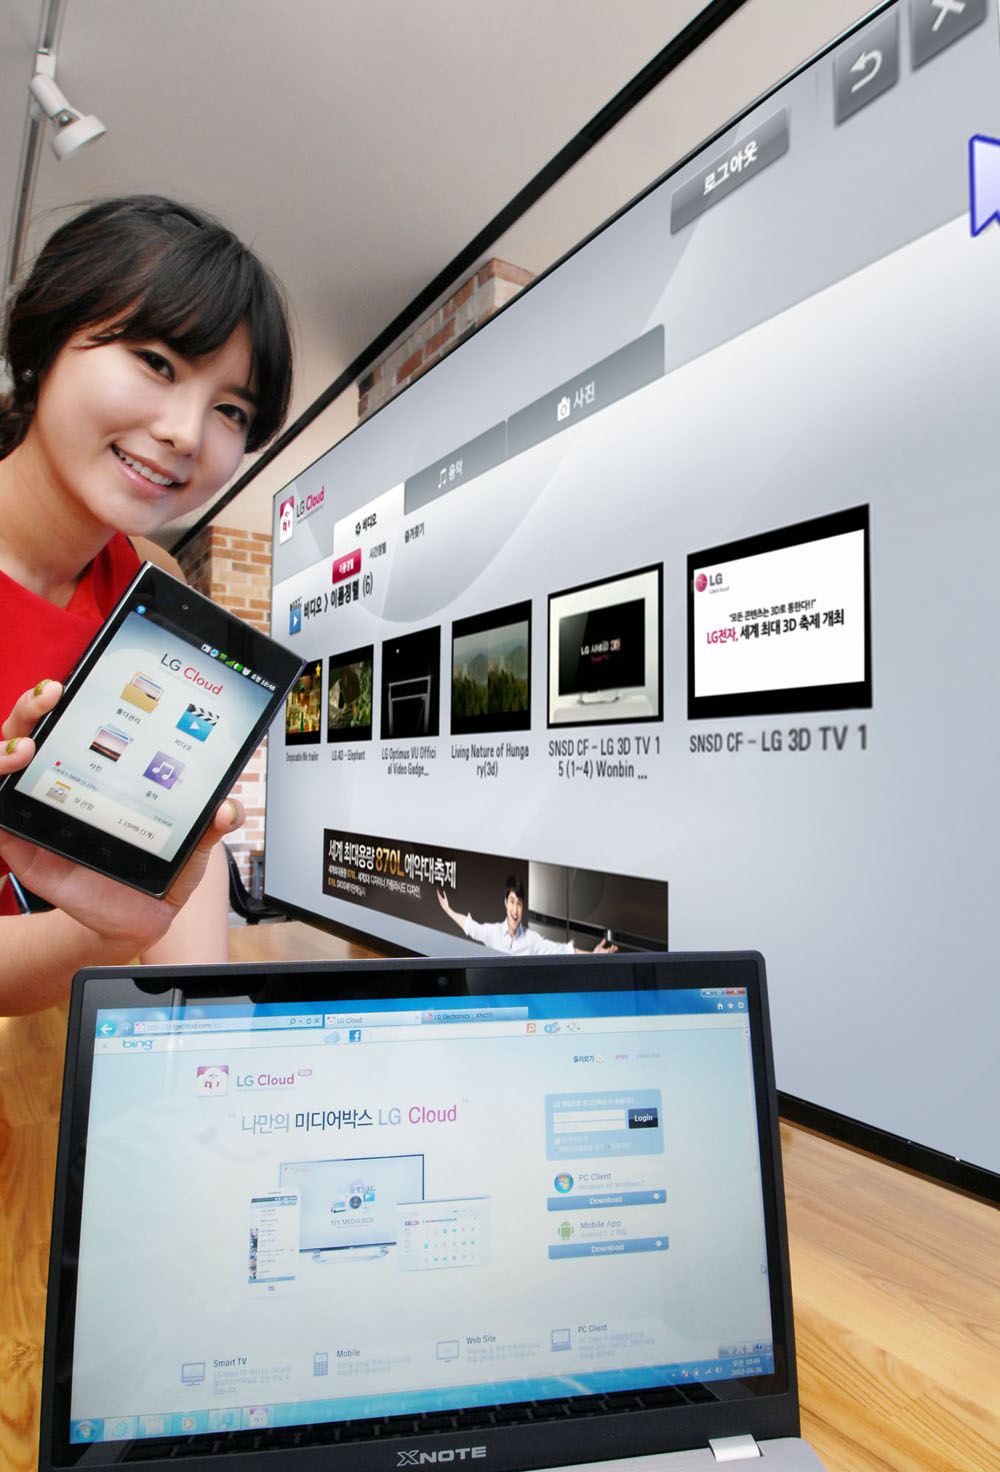 A female model holds up a phone displaying LG Cloud, the company's multimedia cloud platform on the screen while LG's XNote mirrors the phone’s screen.